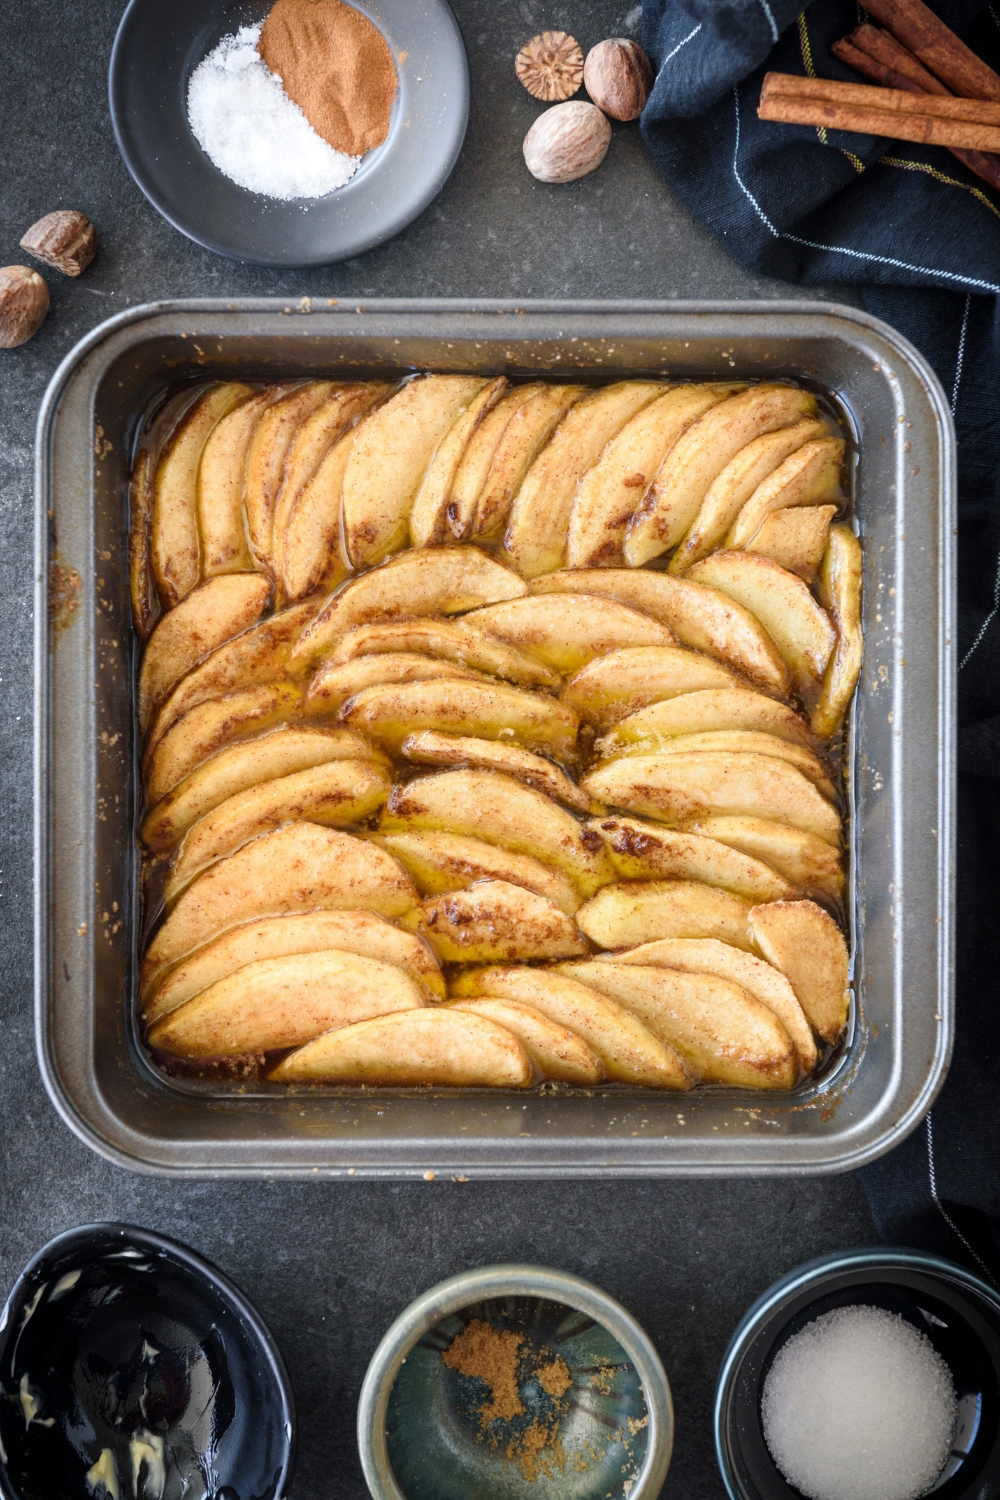 A square baking dish filled with freshly baked apple slices coated in cinnamon and sugar.